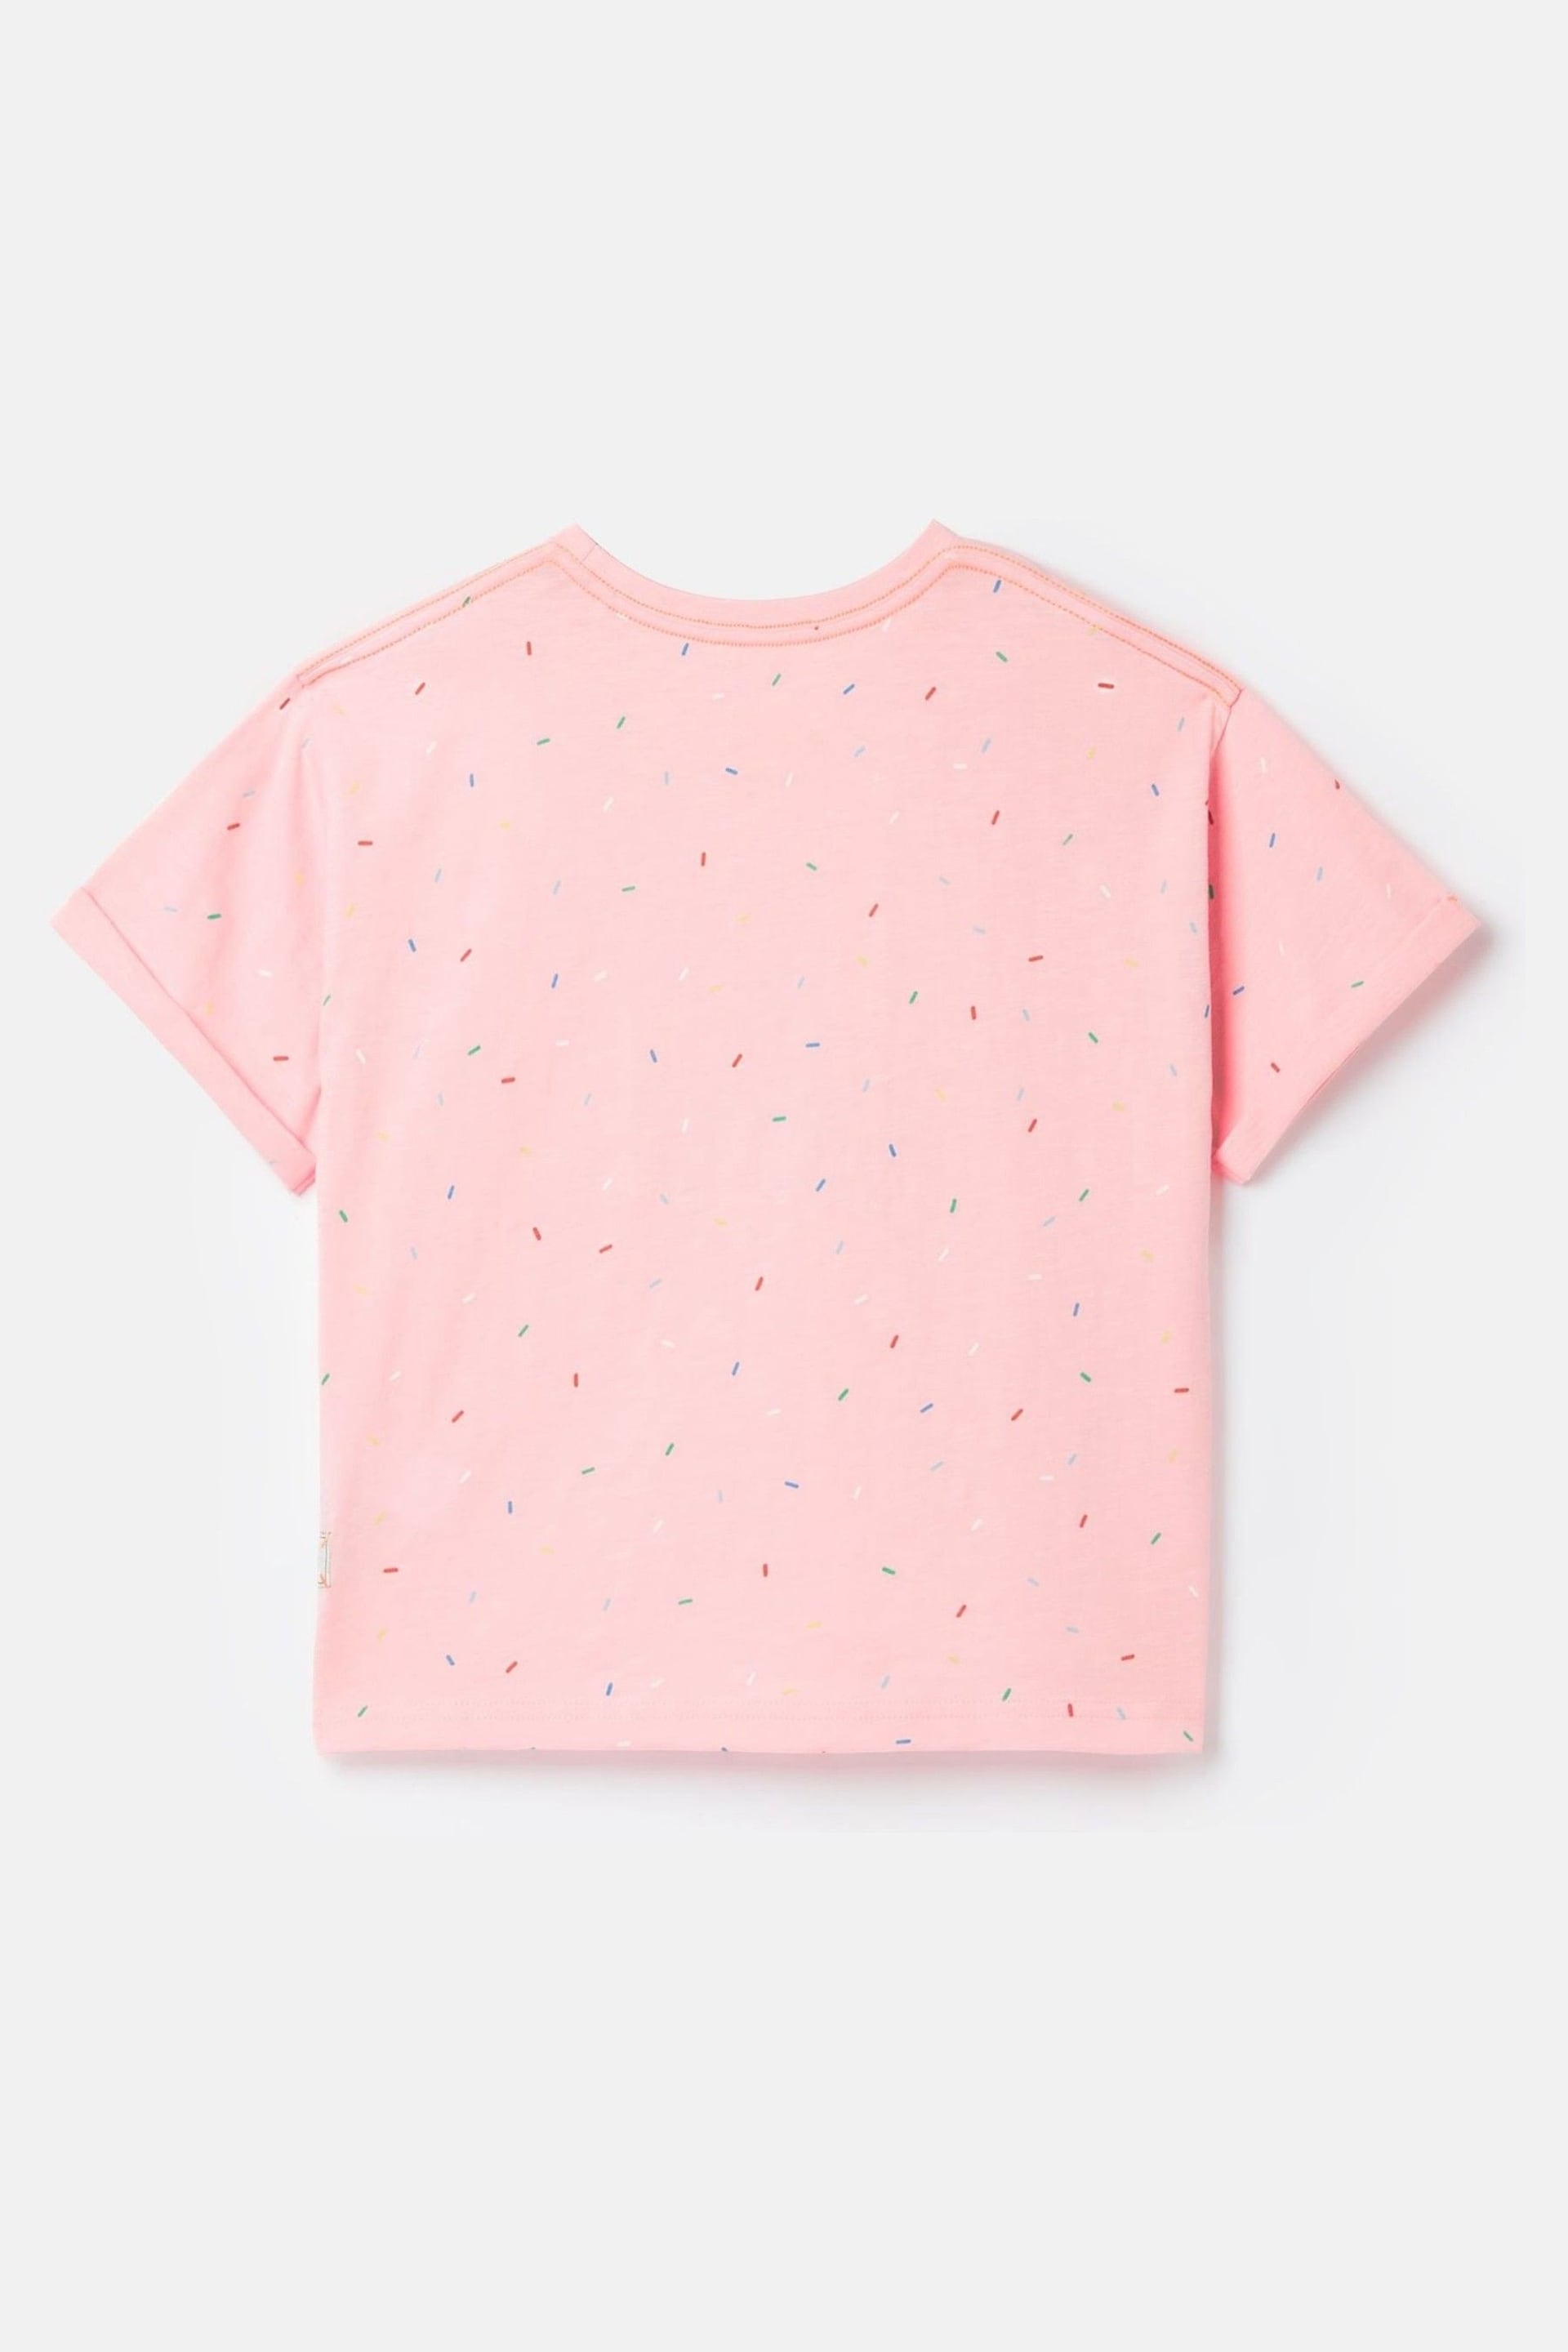 Joules Fun Days Pink Short Sleeve Graphic T-shirt - Image 4 of 7